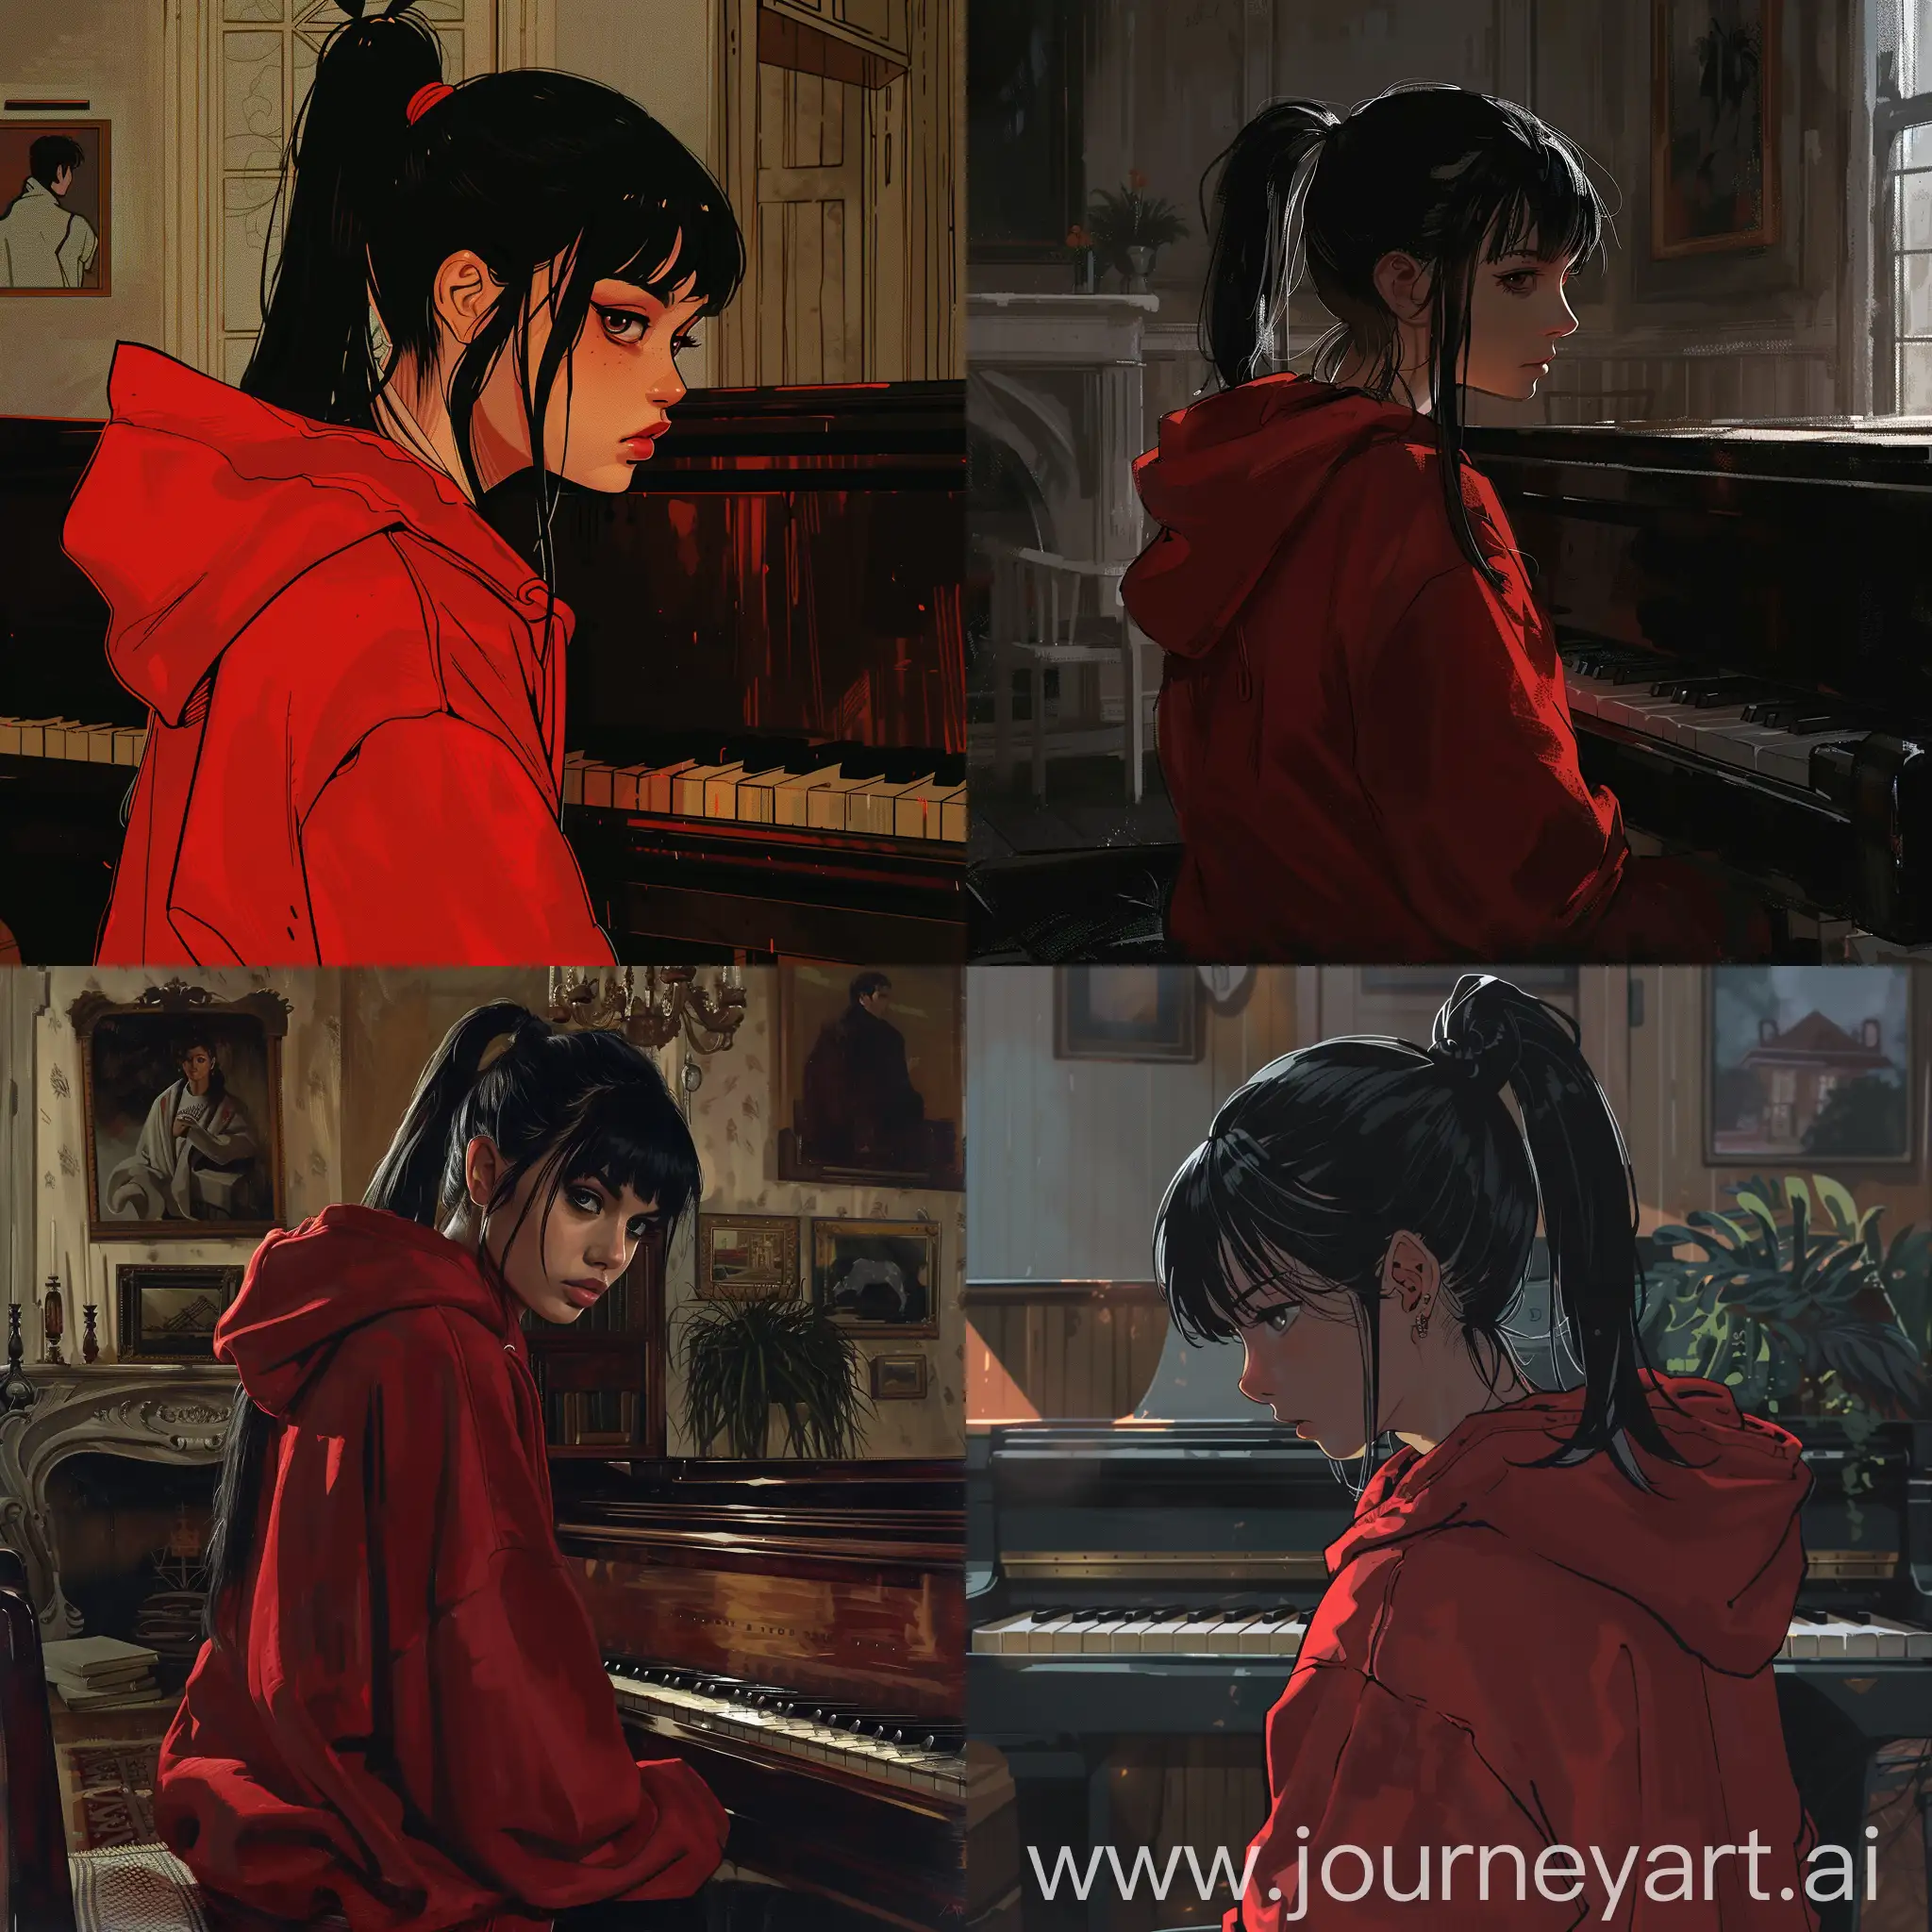 Lonely-Girl-in-Red-Hoodie-Watching-Guests-in-Big-House-with-Acoustic-Piano